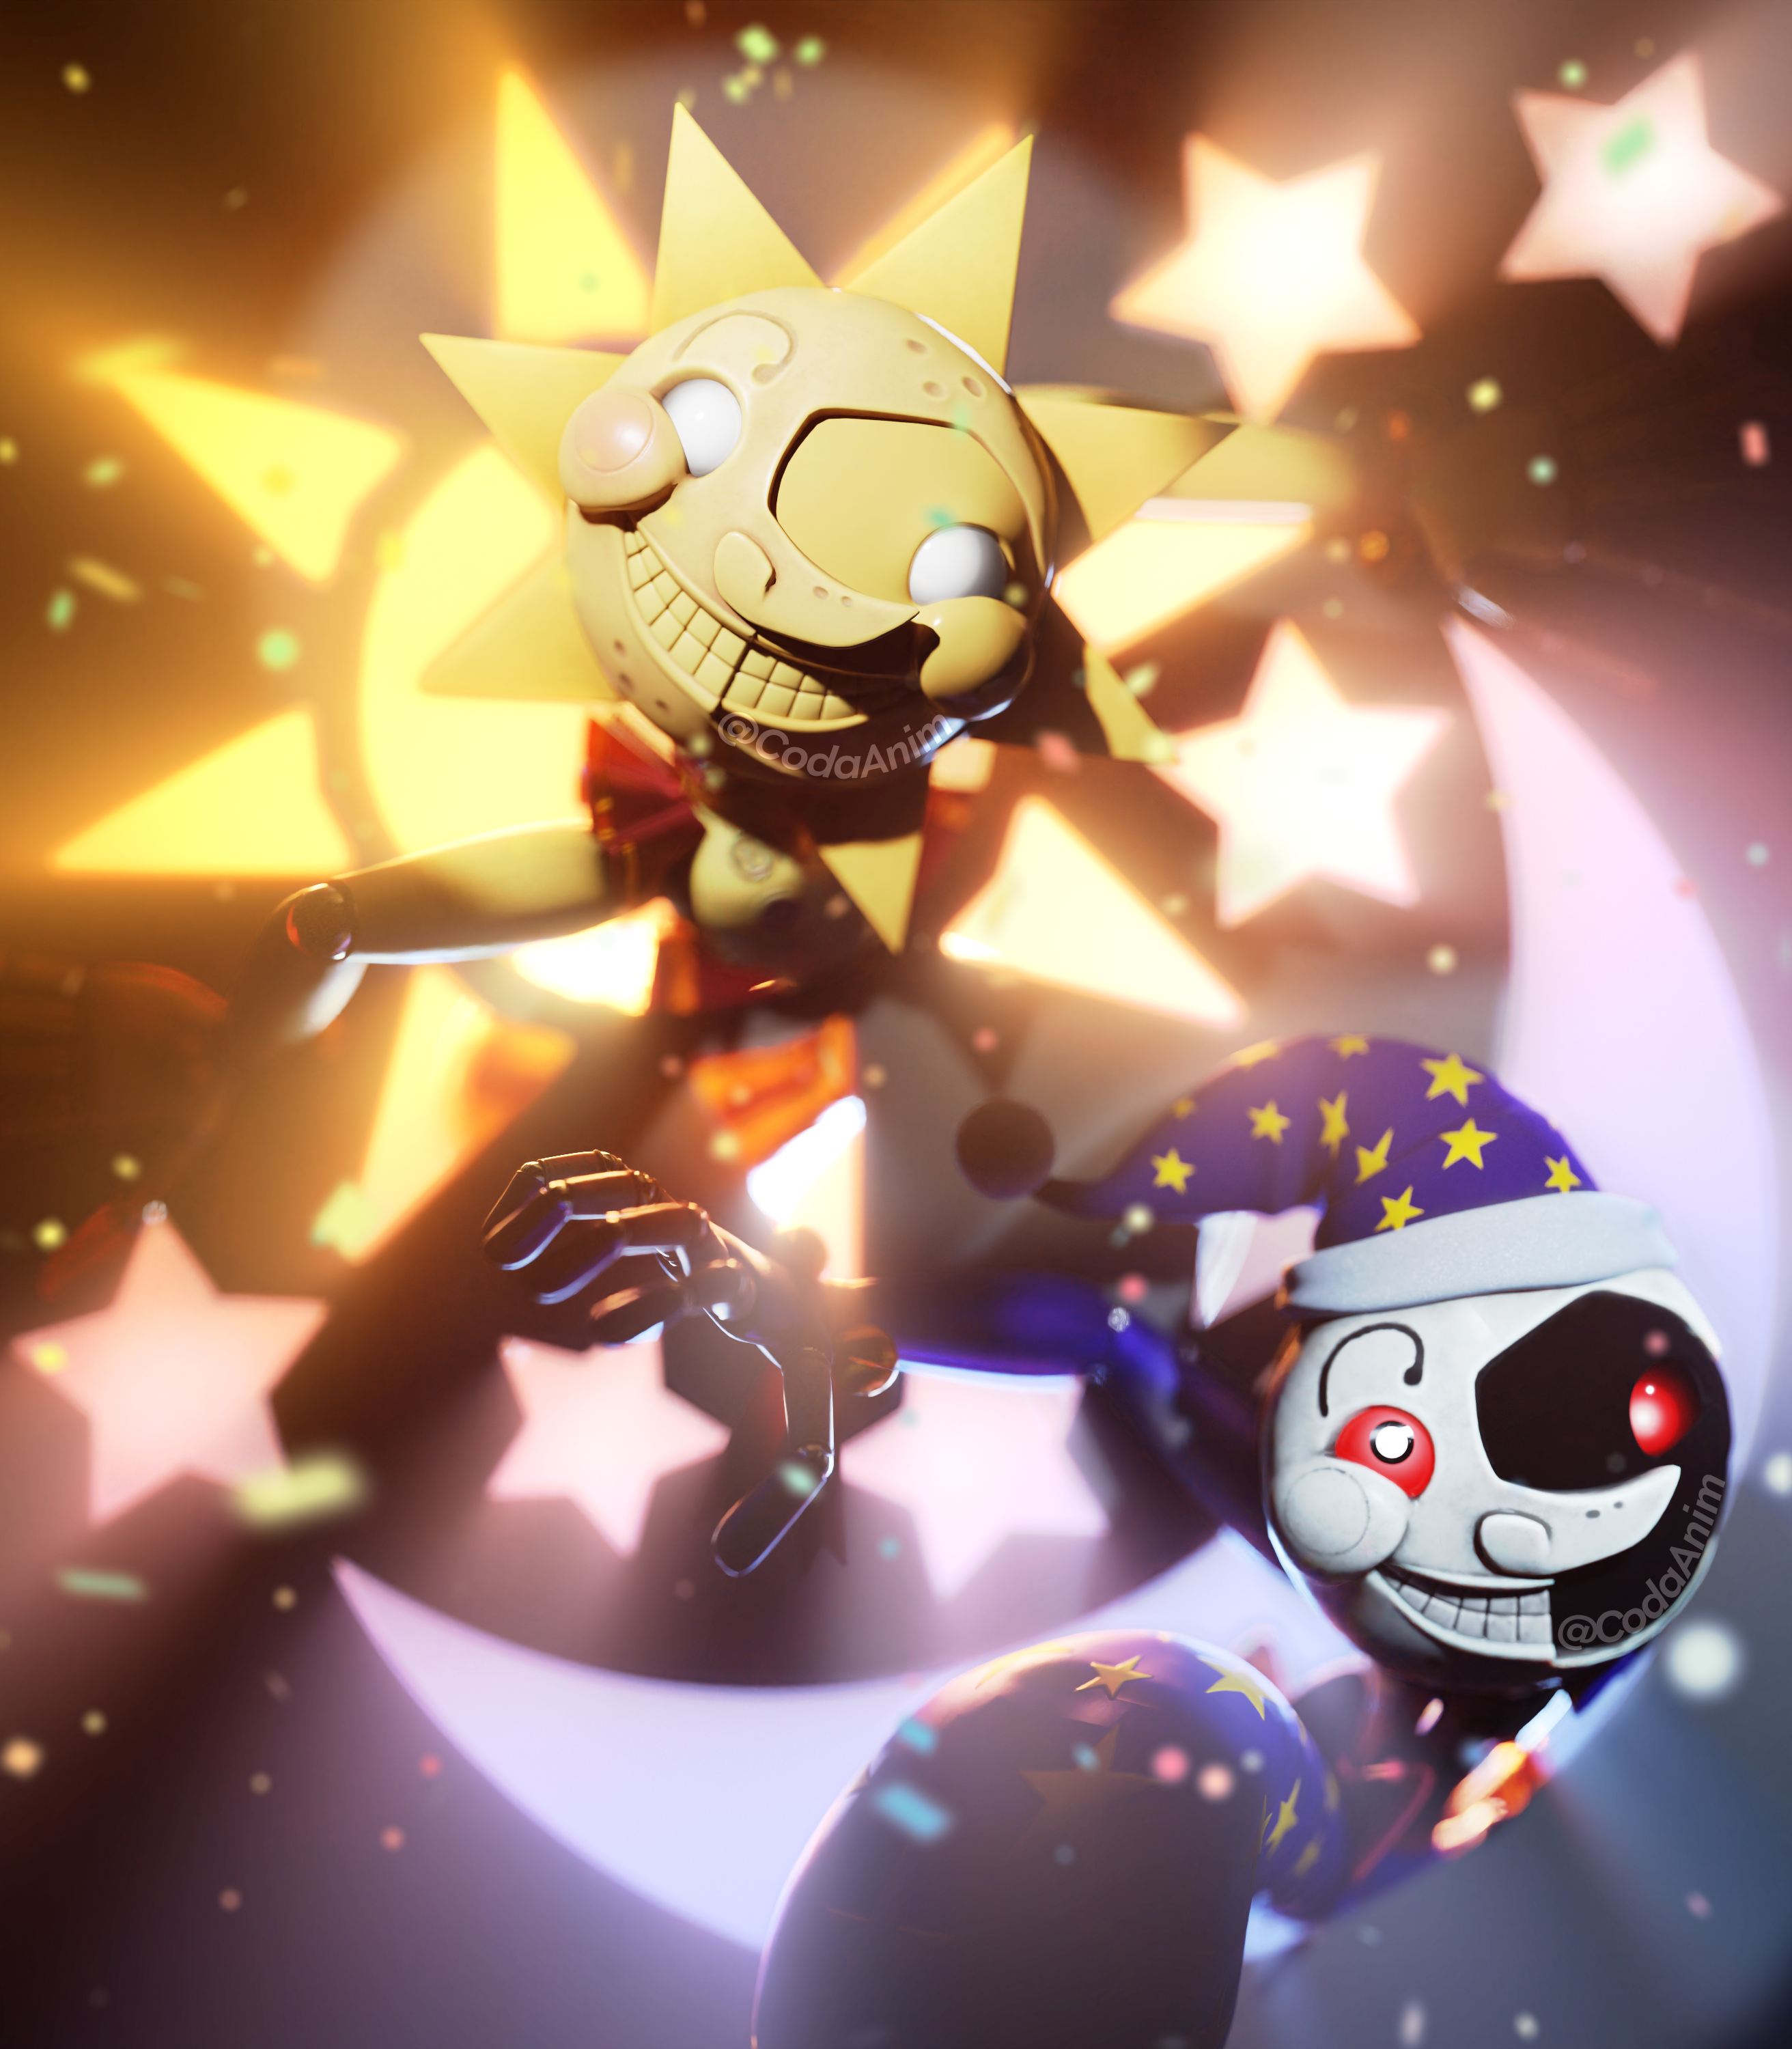 When the Sun rises, the Moon drops (Models commissioned from CoolioArt!)